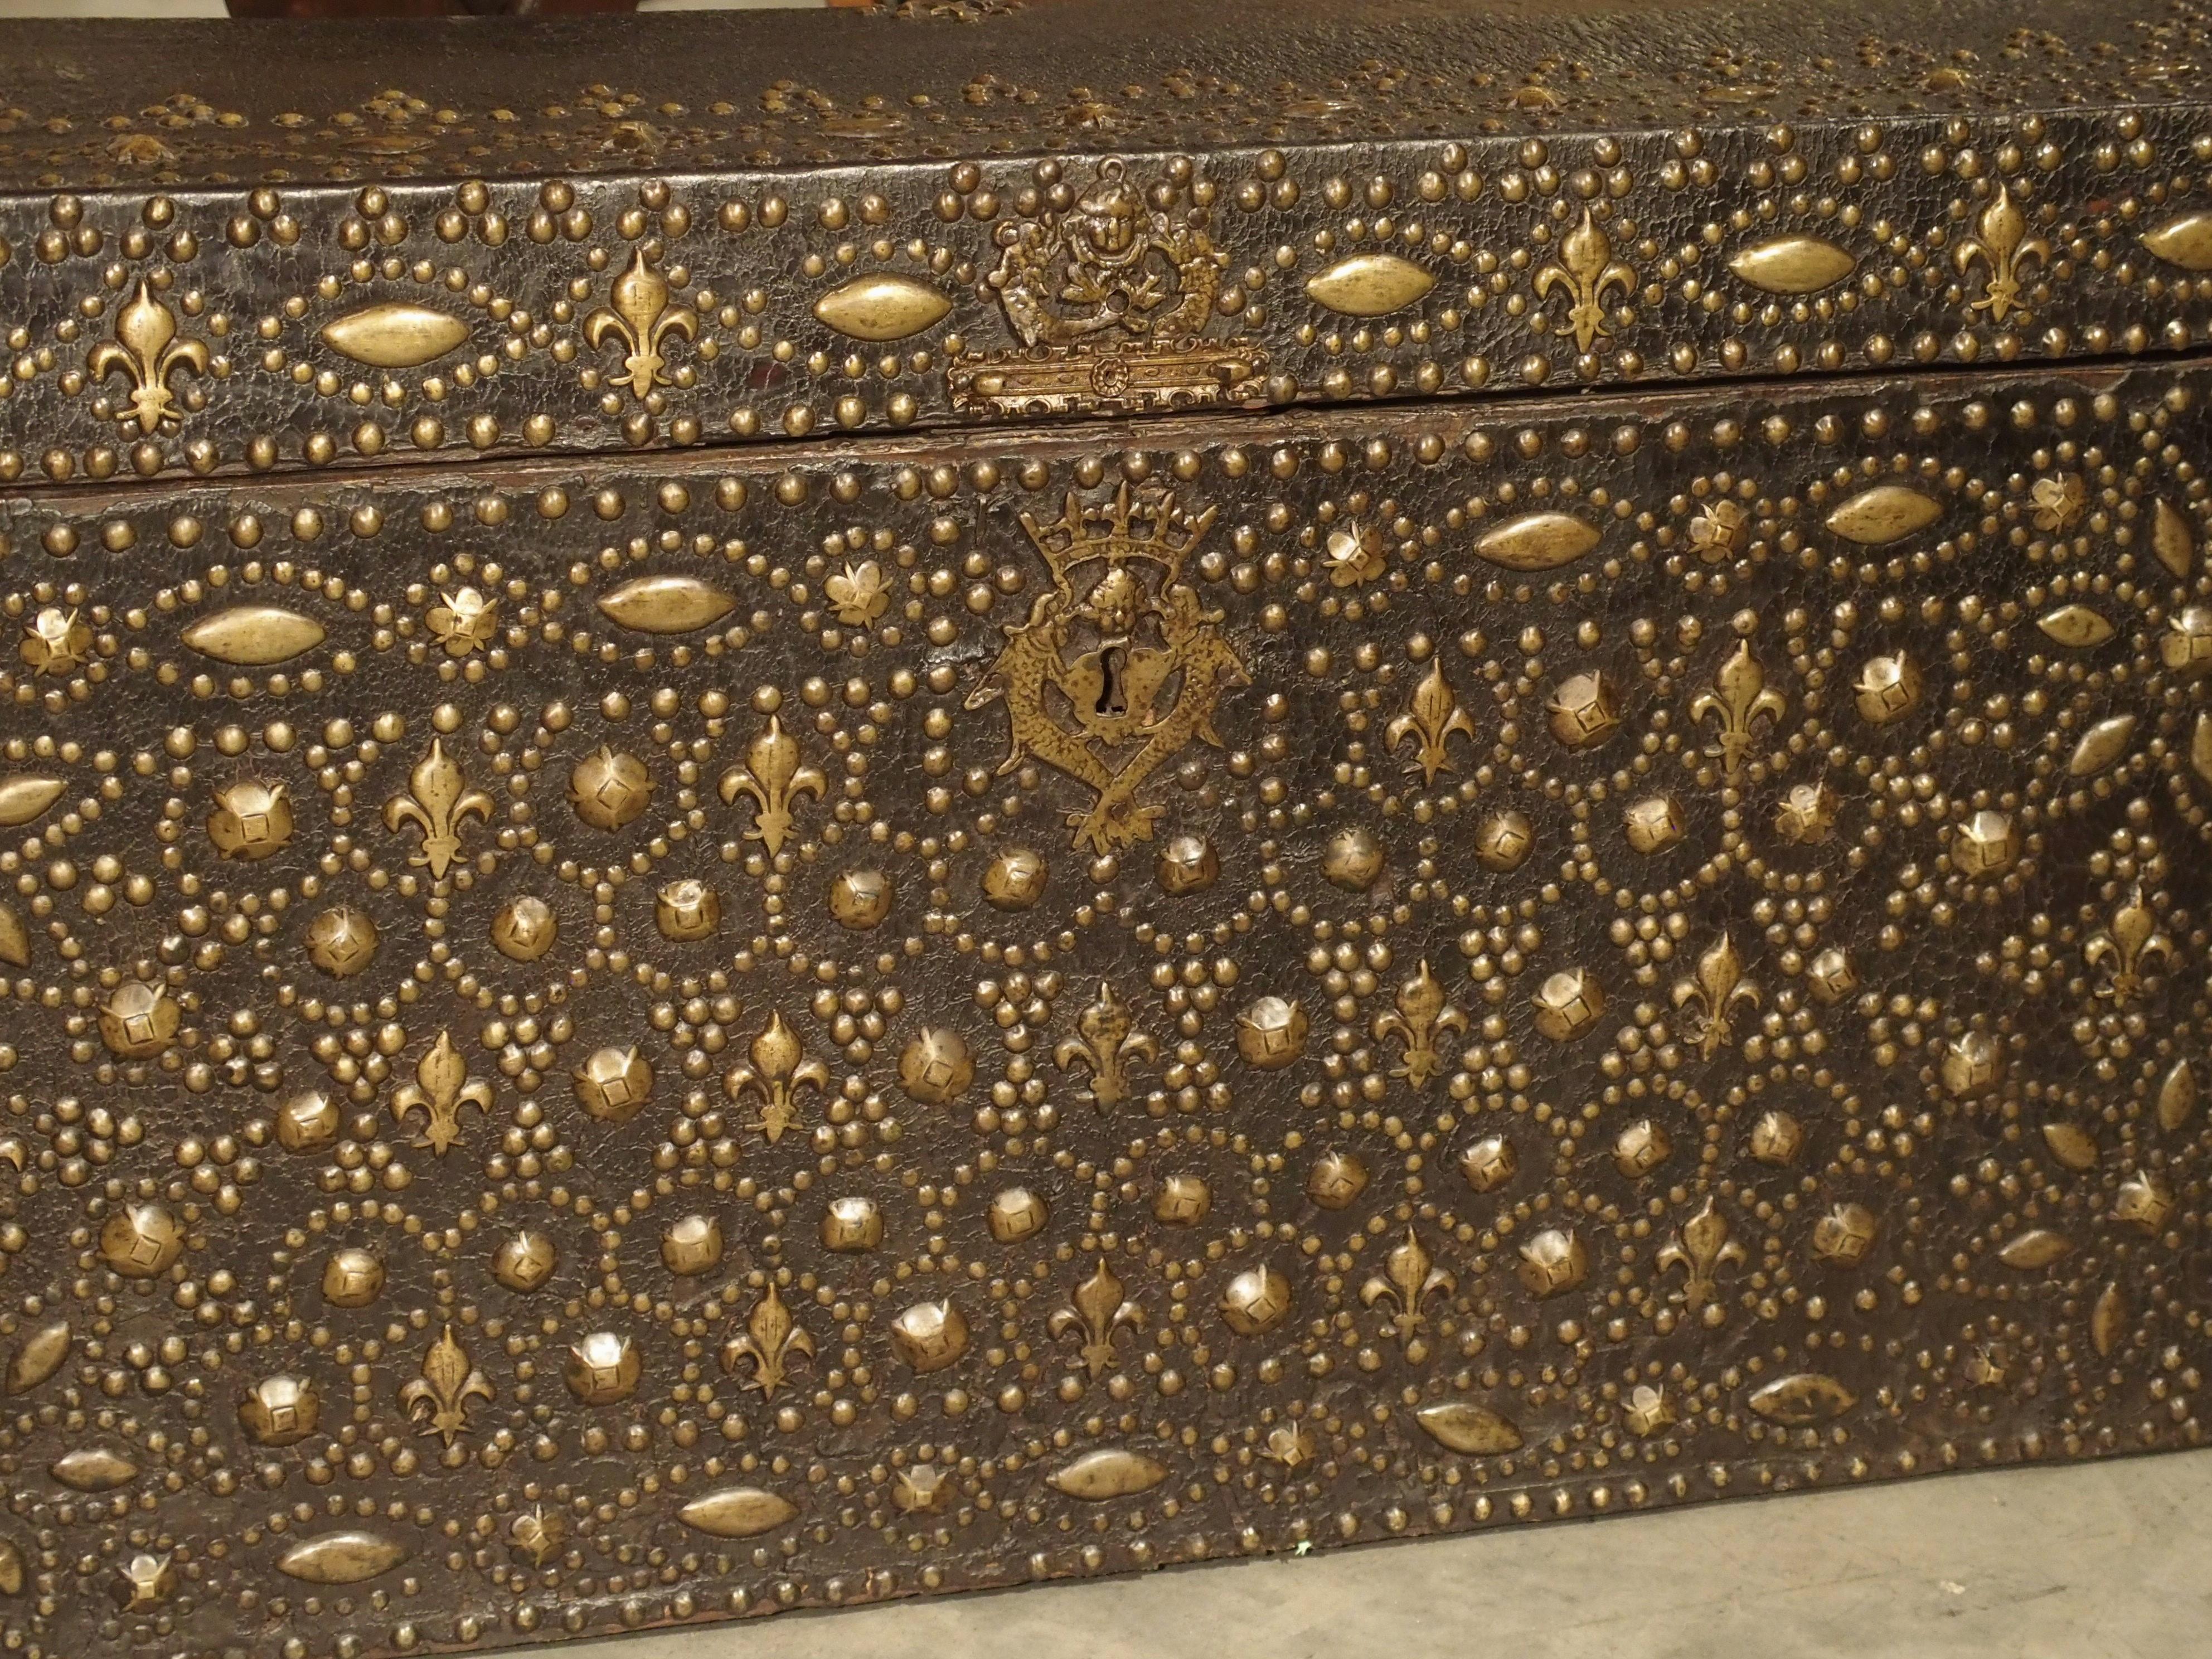 Trunks are one of the oldest types of furniture in existence today. They date back many centuries and come in various shapes and styles. This leather and brass trunk, known as a malle, has some spectacular features that make it a unique find among